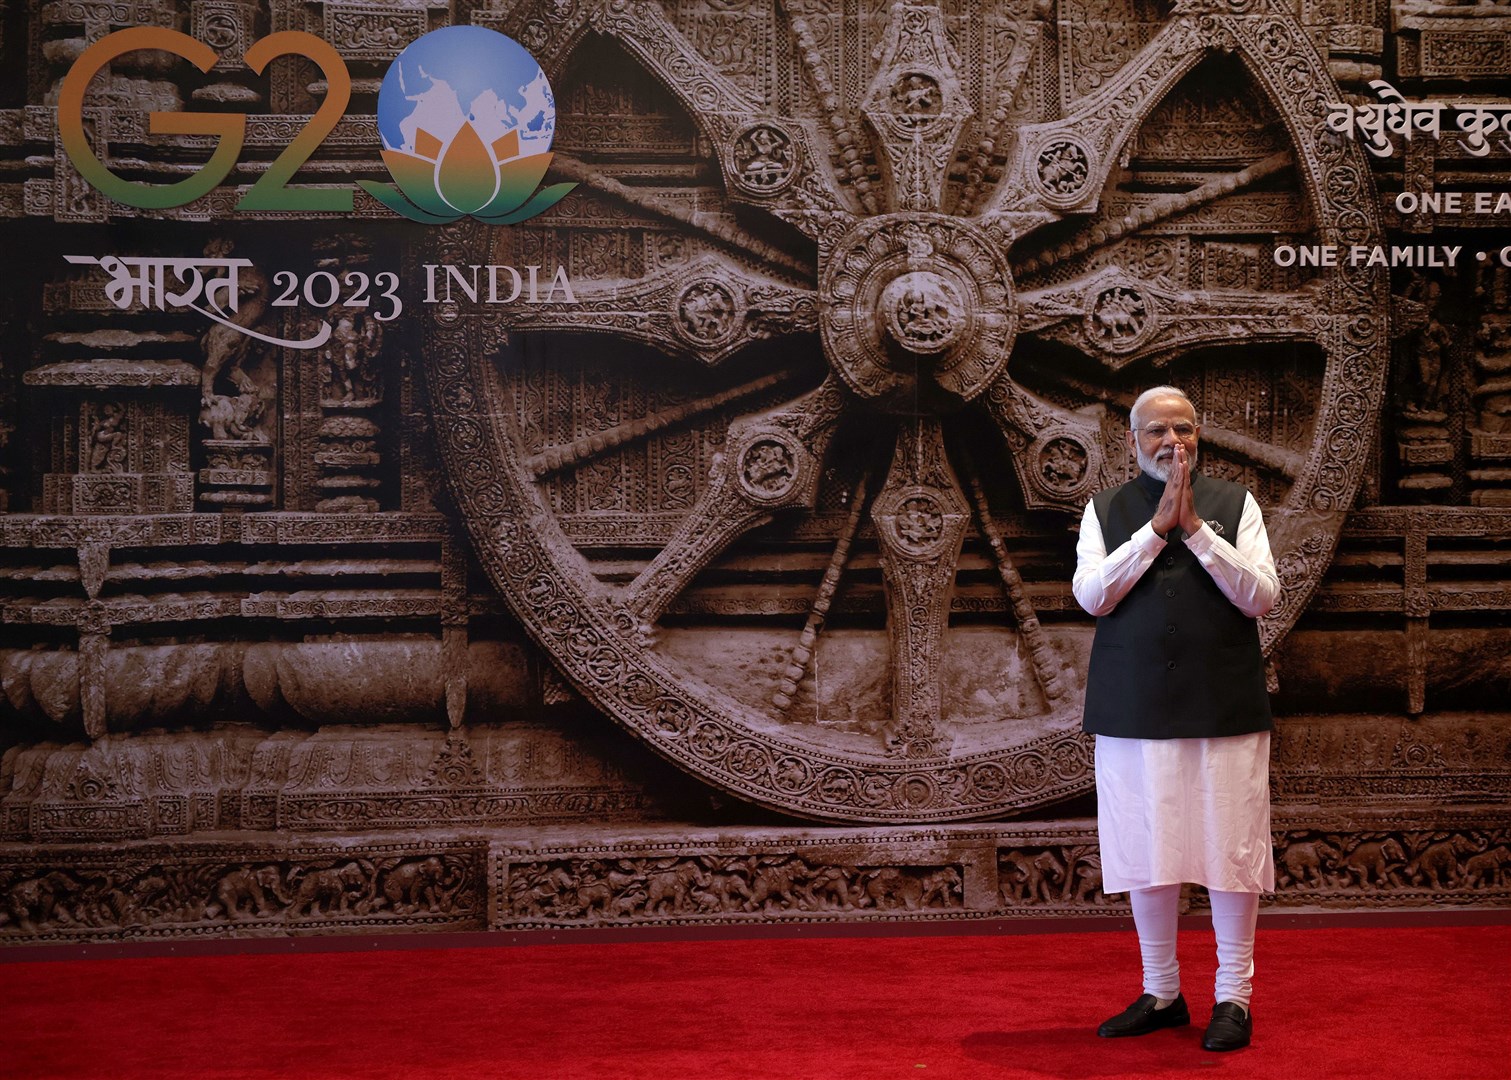 Indian prime minister Narendra Modi had made a call for more climate support ahead of the G20 summit (Dan Kitwood/PA)